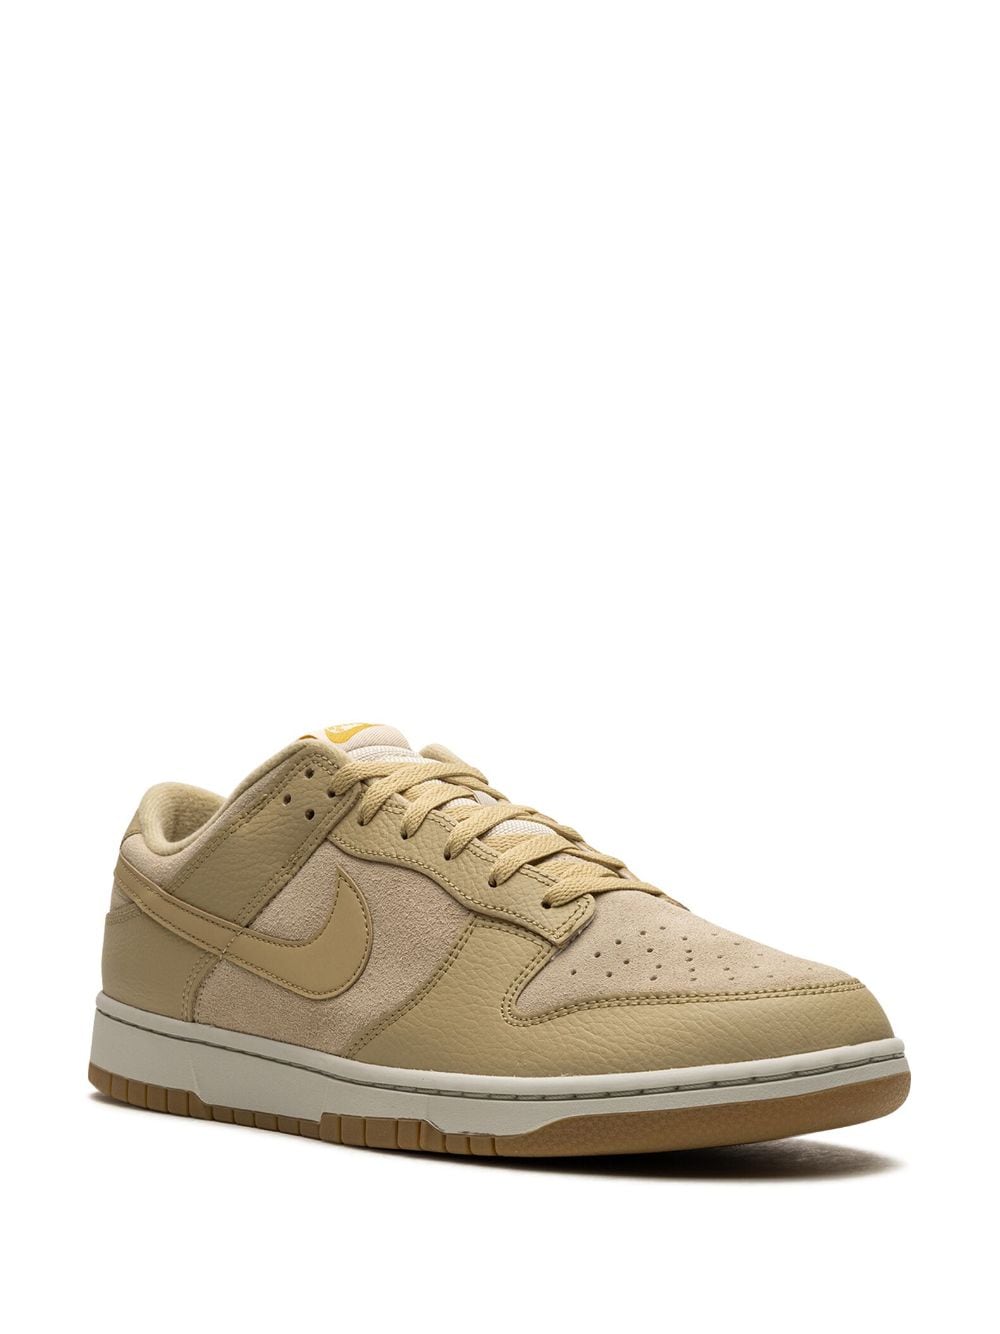 Image 2 of Nike Dunk Low "Wheat" suede sneakers